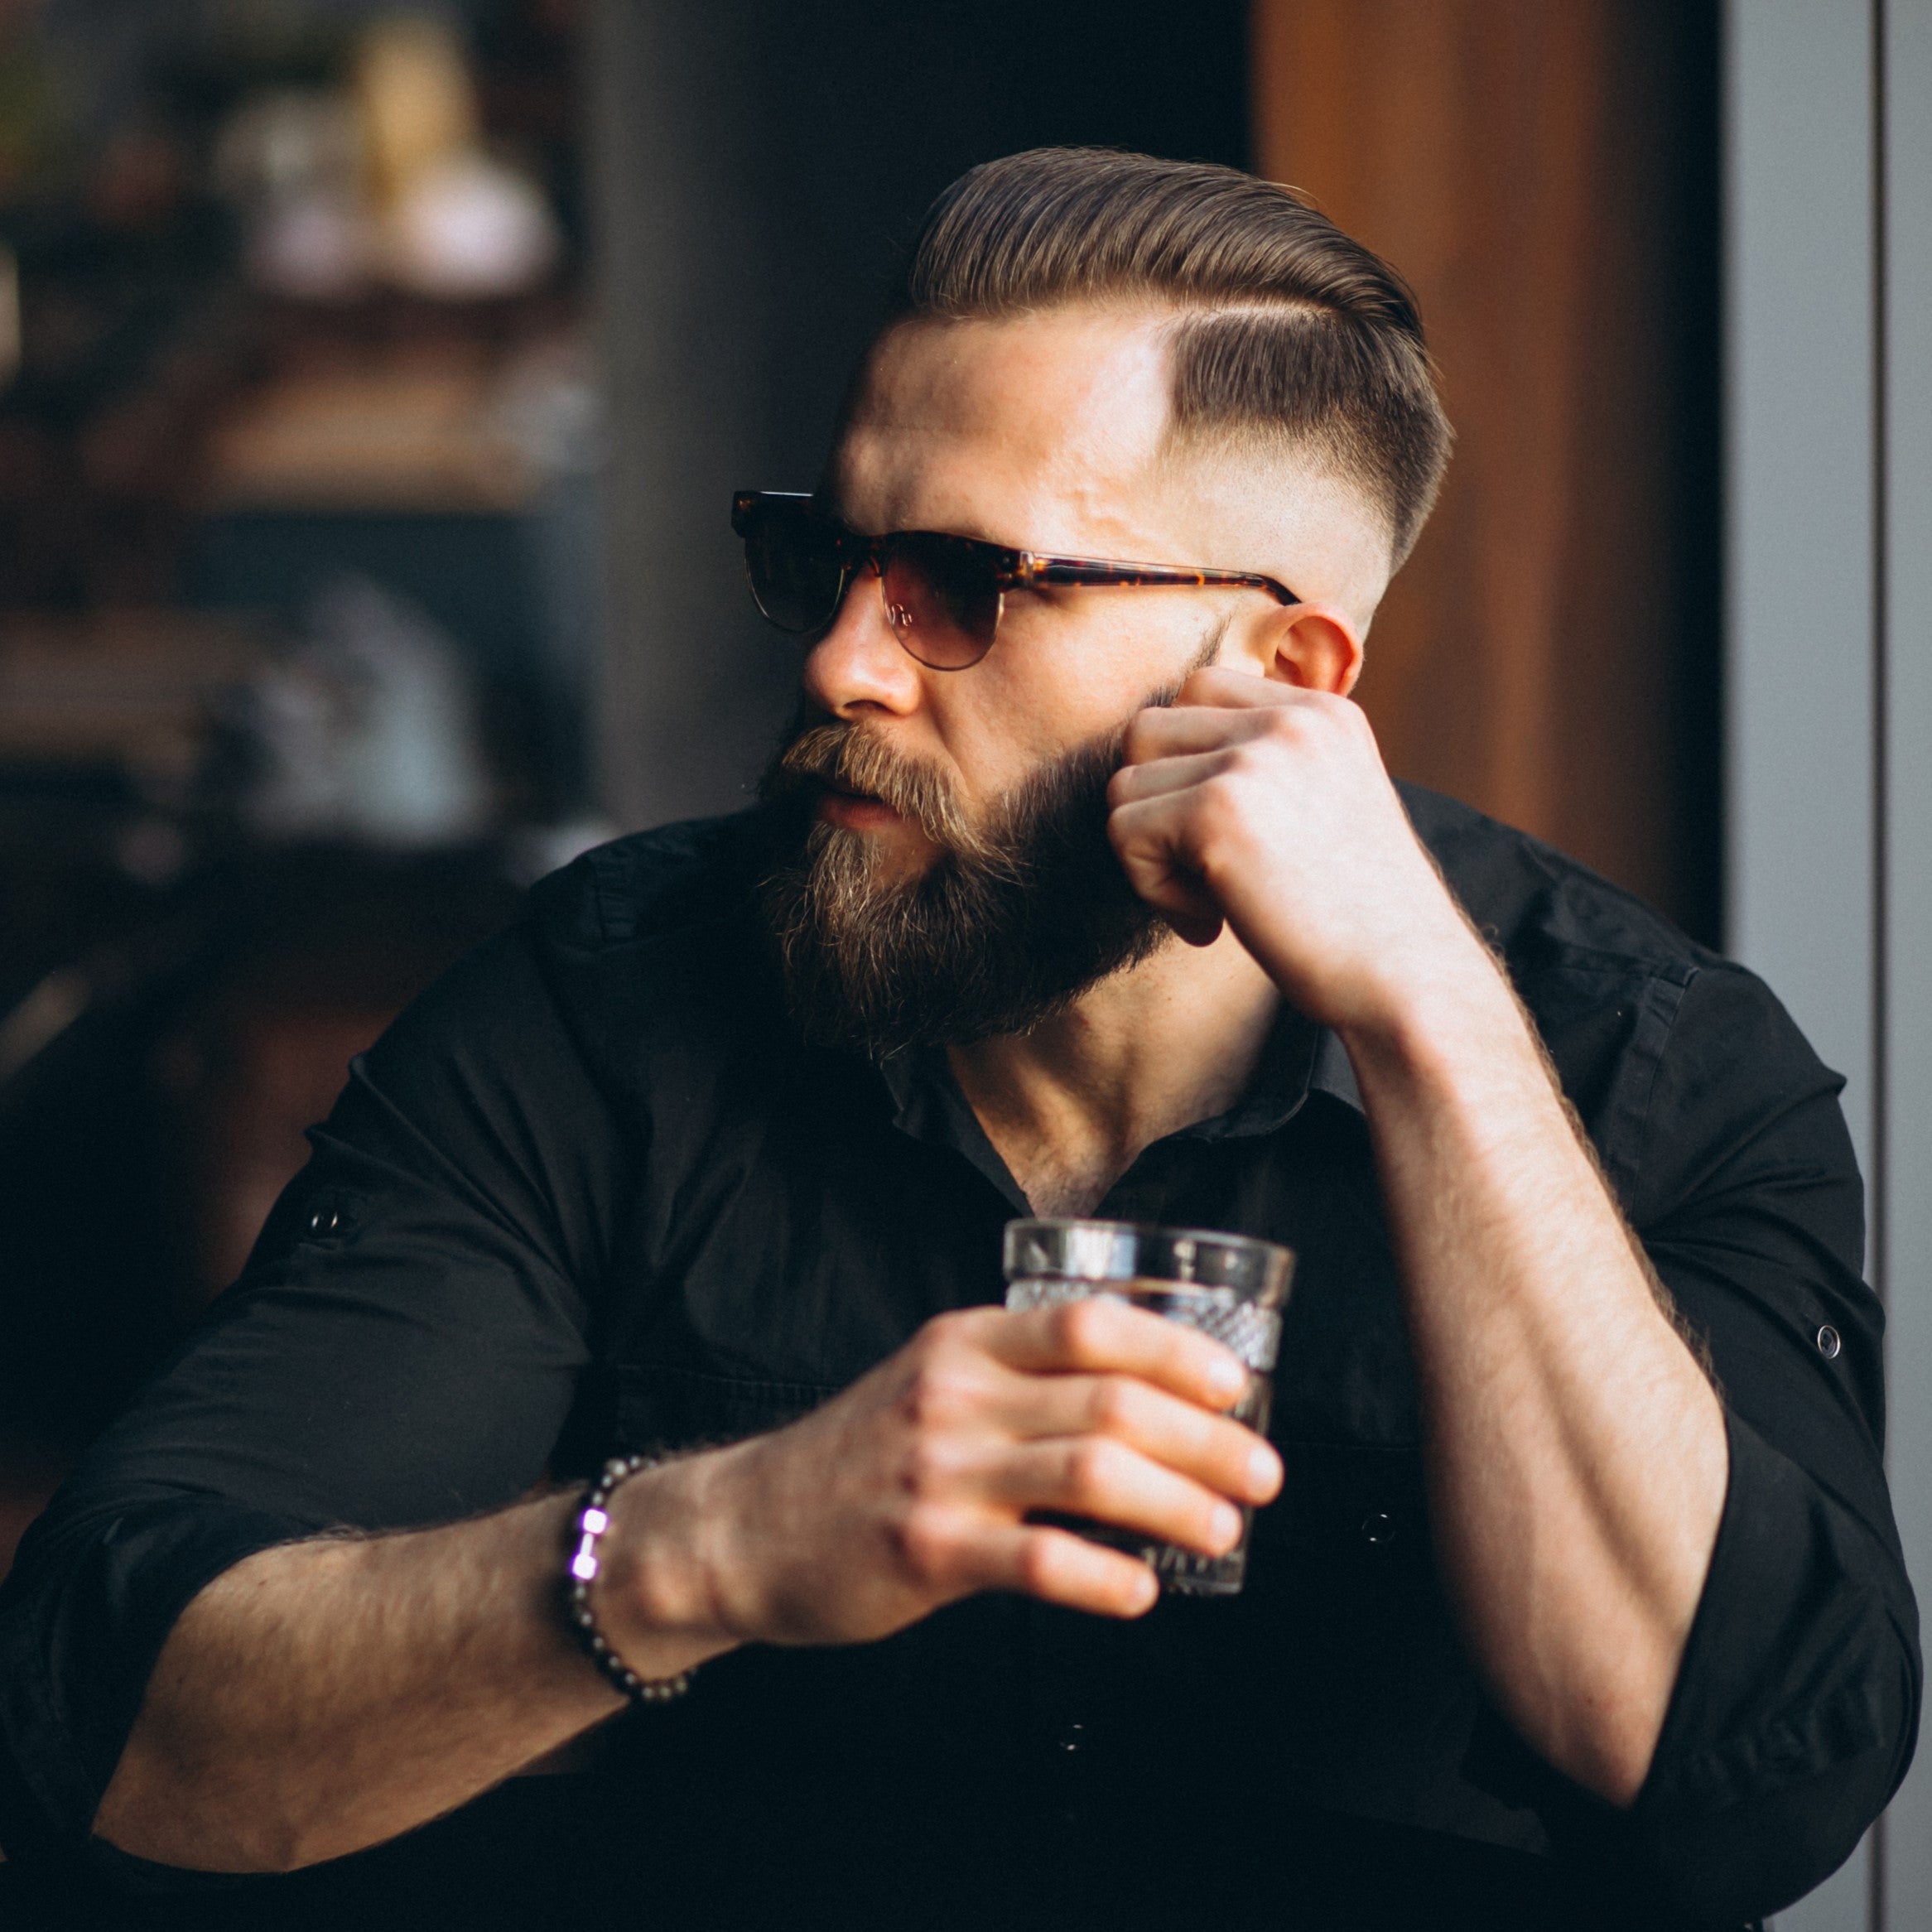 Top 5 Questions Men with Beards Can't Escape